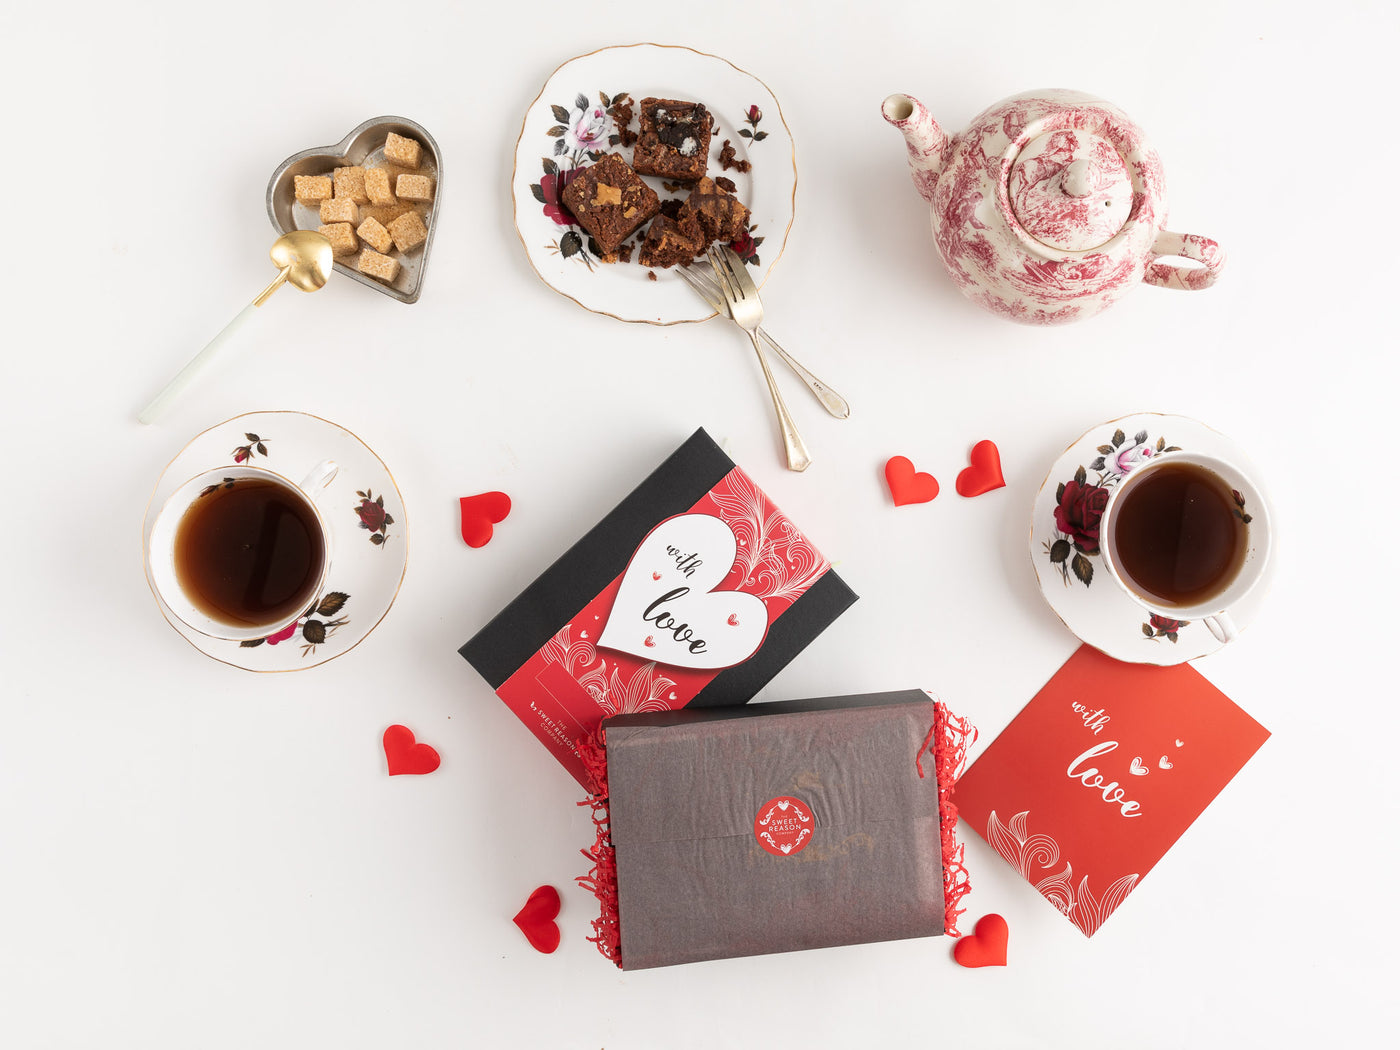 With Love Luxury Brownie Gift for 3 Months